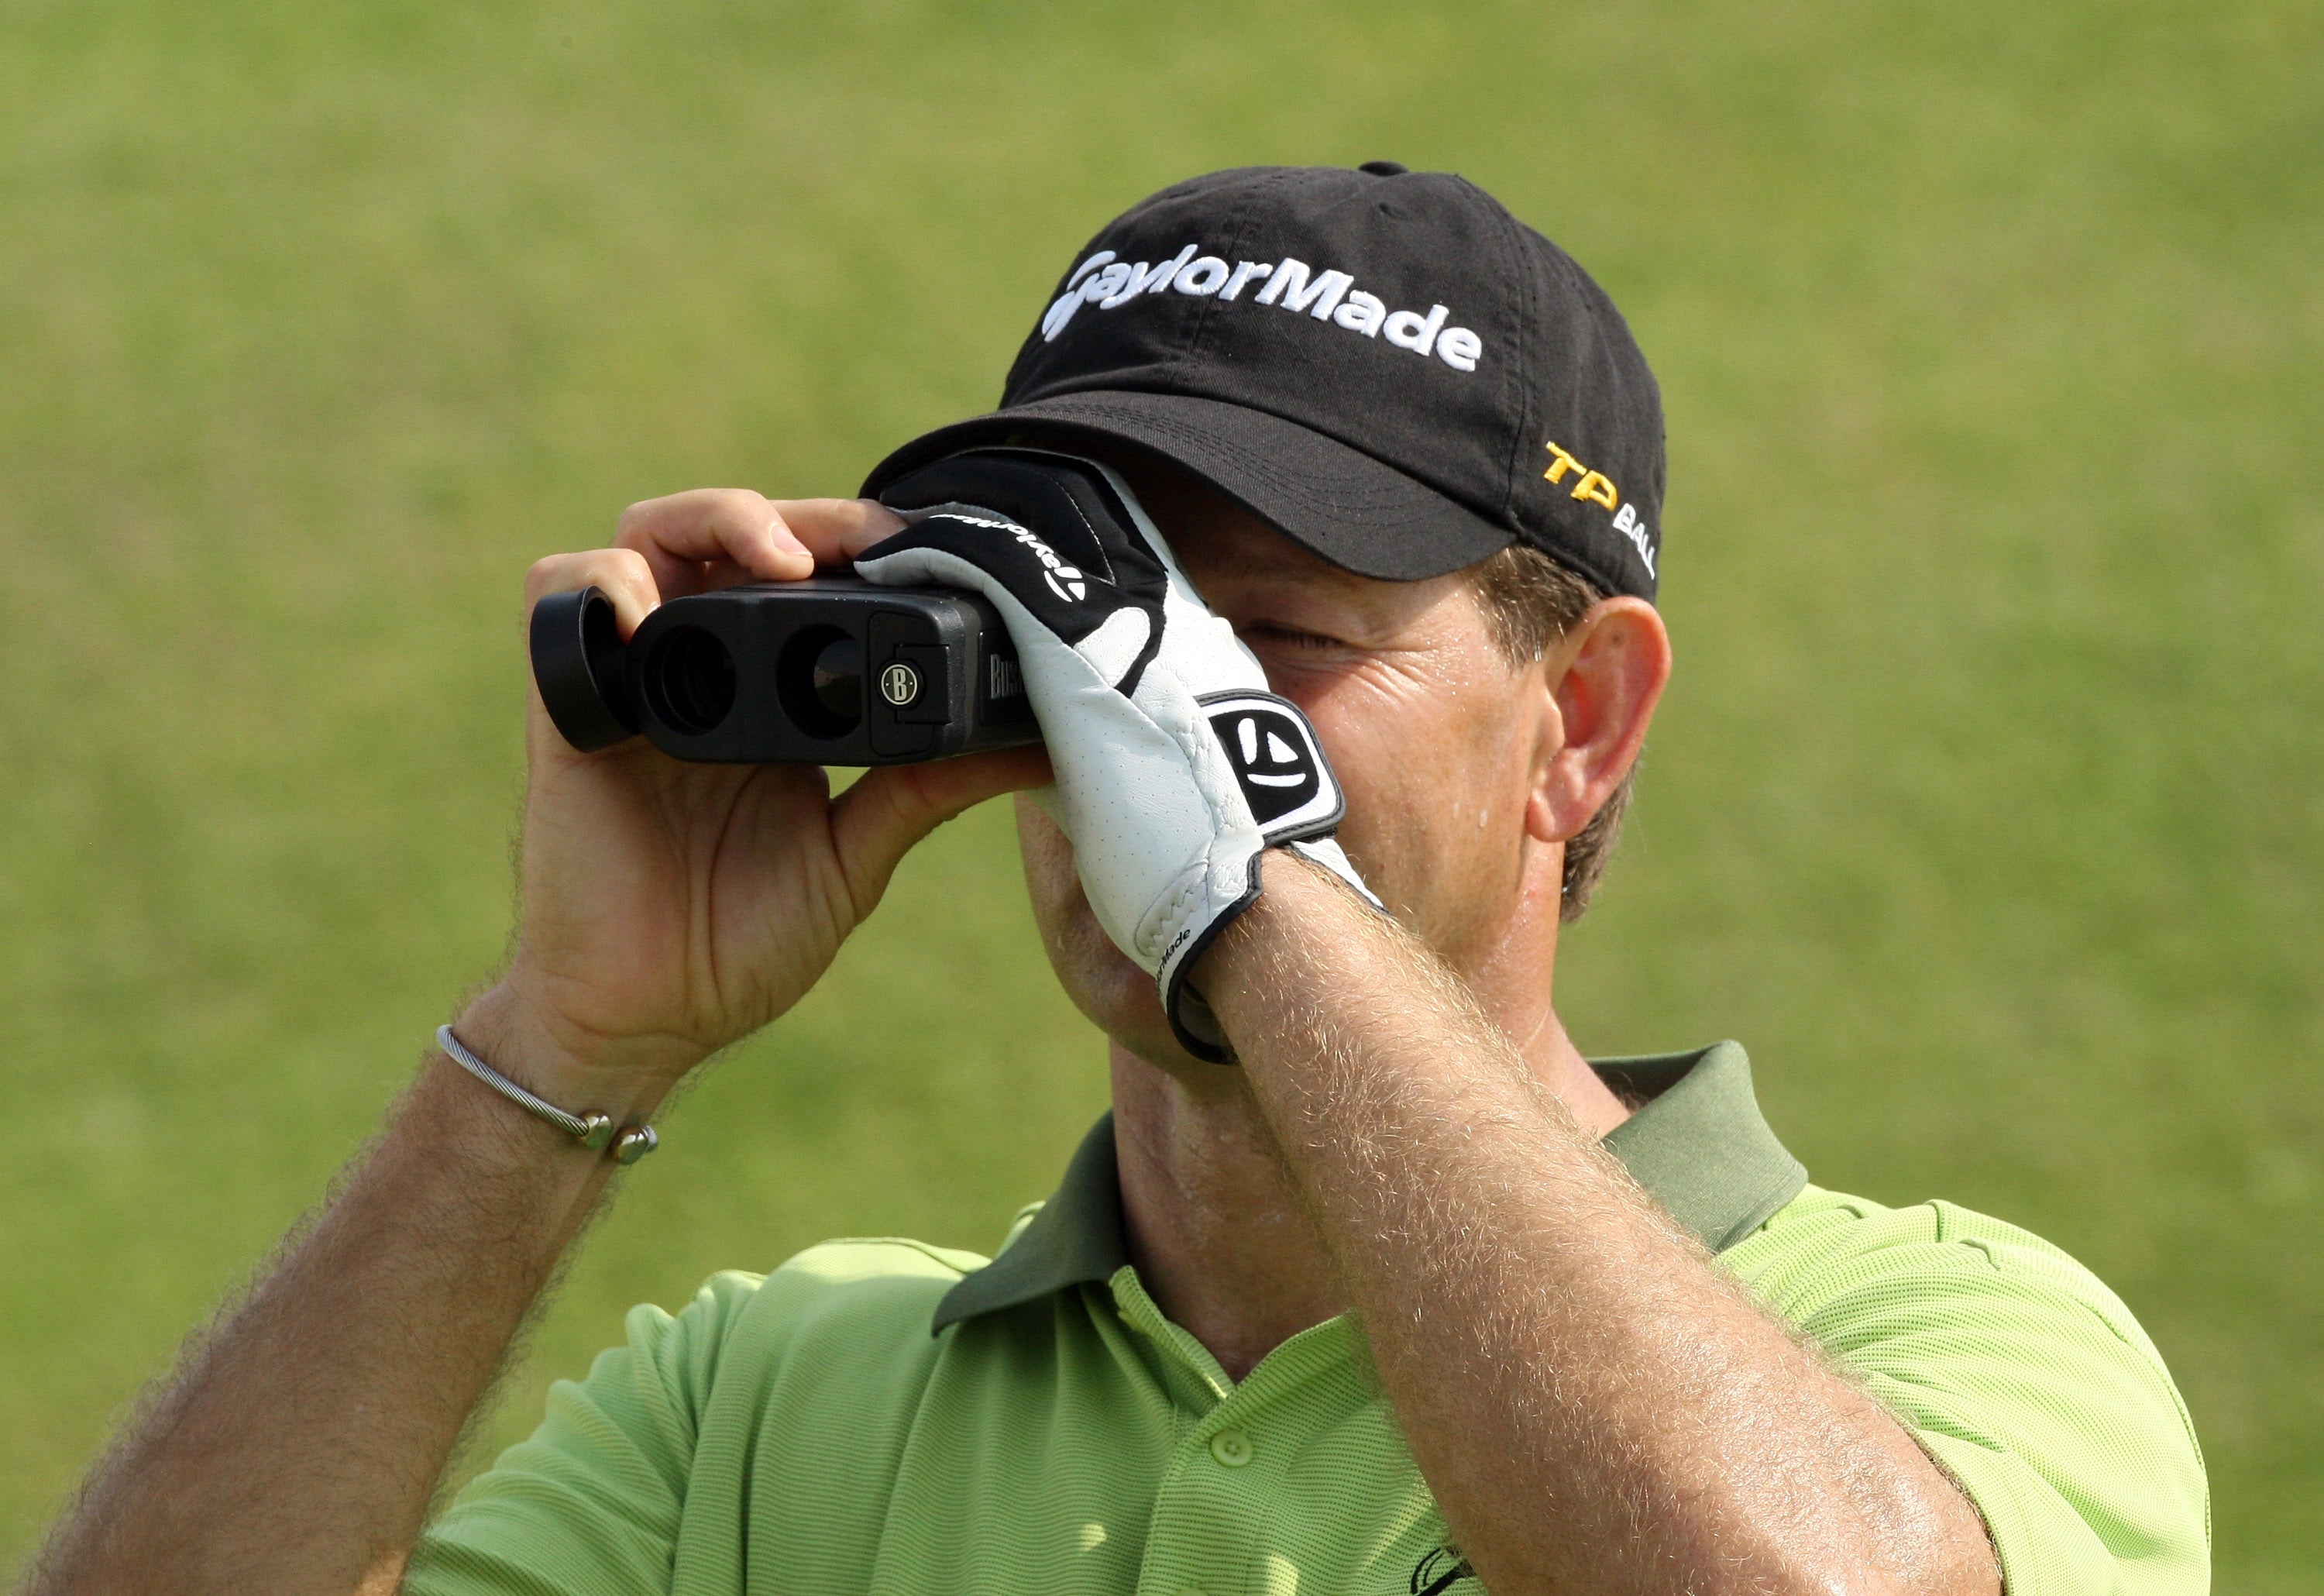 write a blog about The benefits of using a golf rangefinder on the course